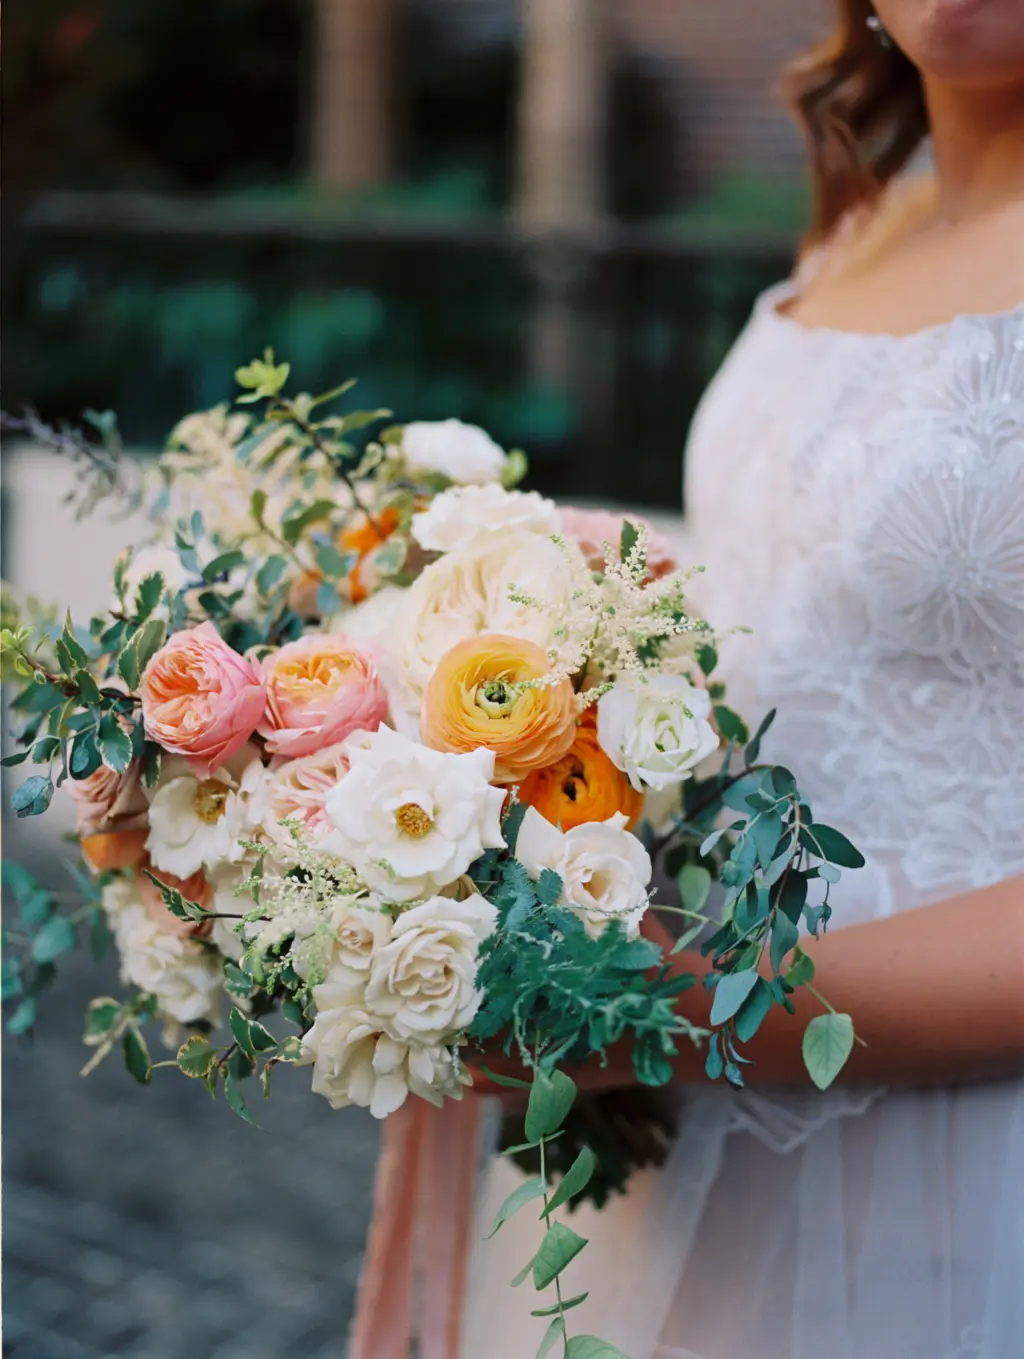 Spring Wedding Bouquet with Pink, Orange, and White Roses and Greenery Inspiration